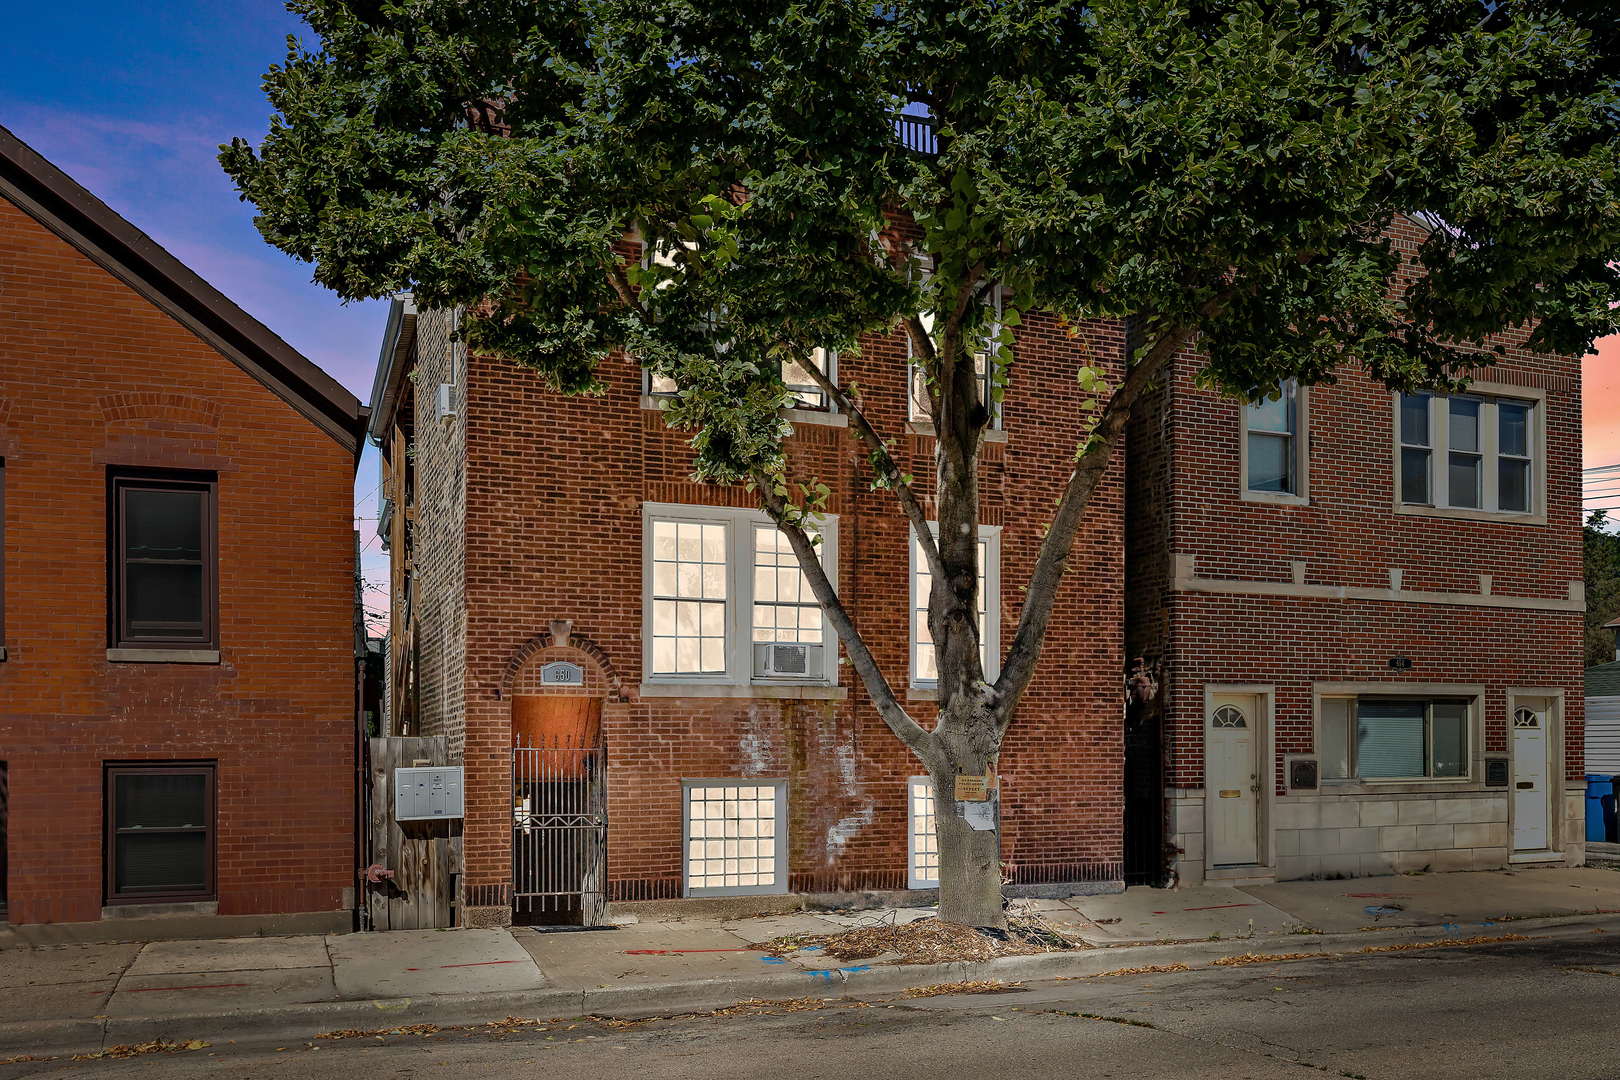 a tree in front of a brick building